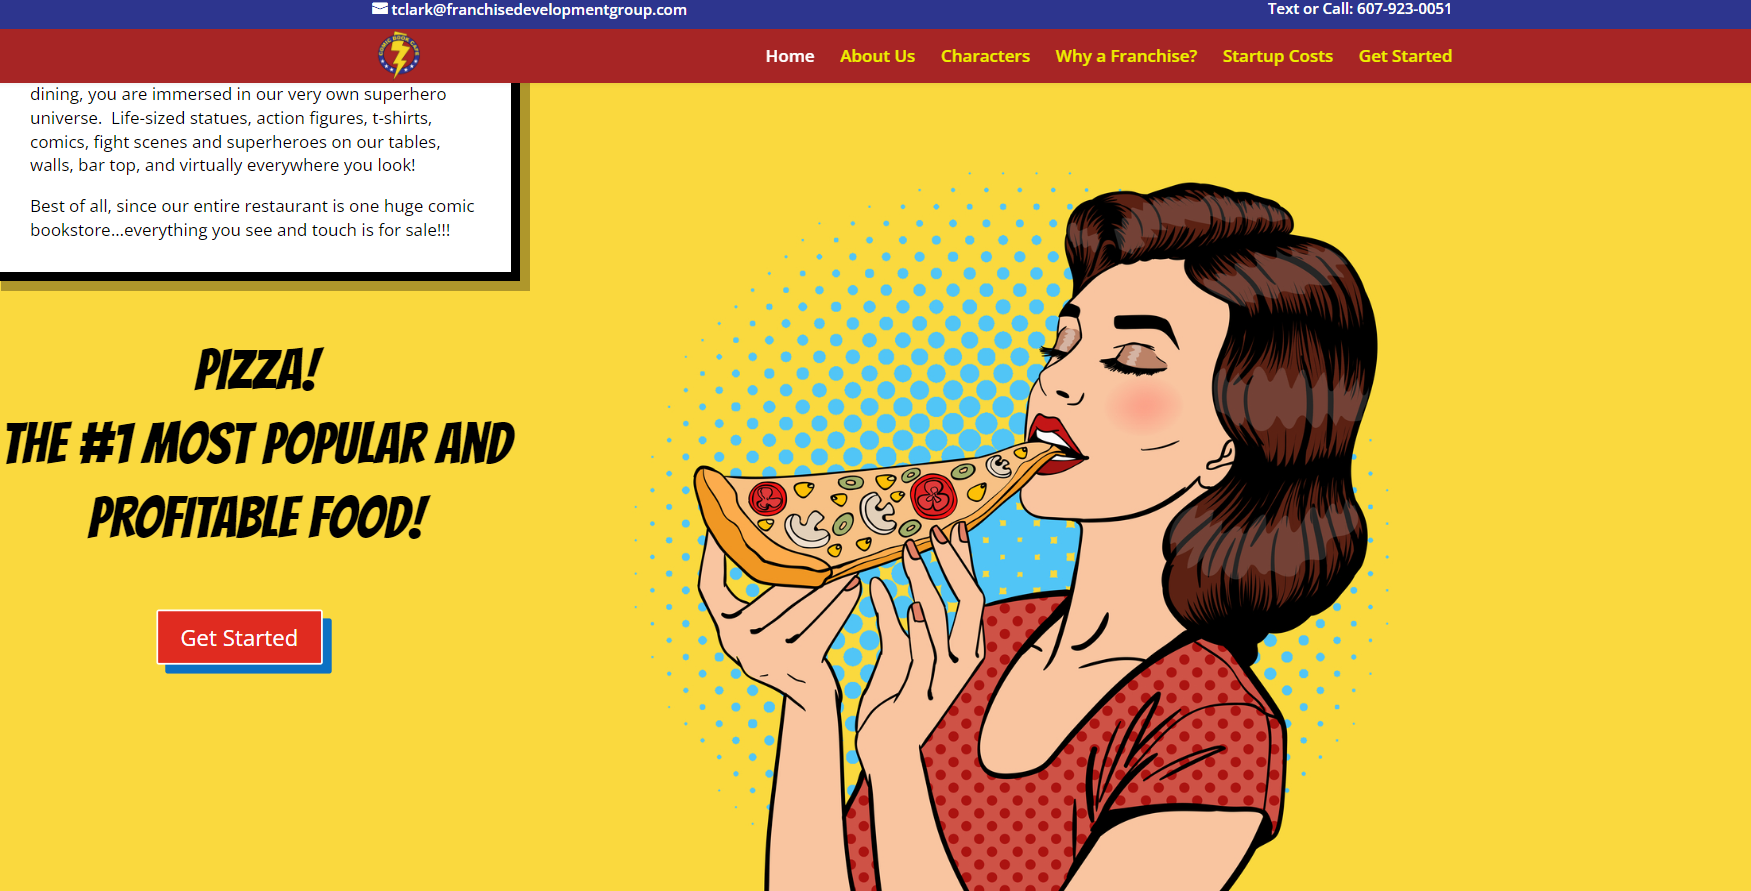 New Website Launched for Pizza Franchise 